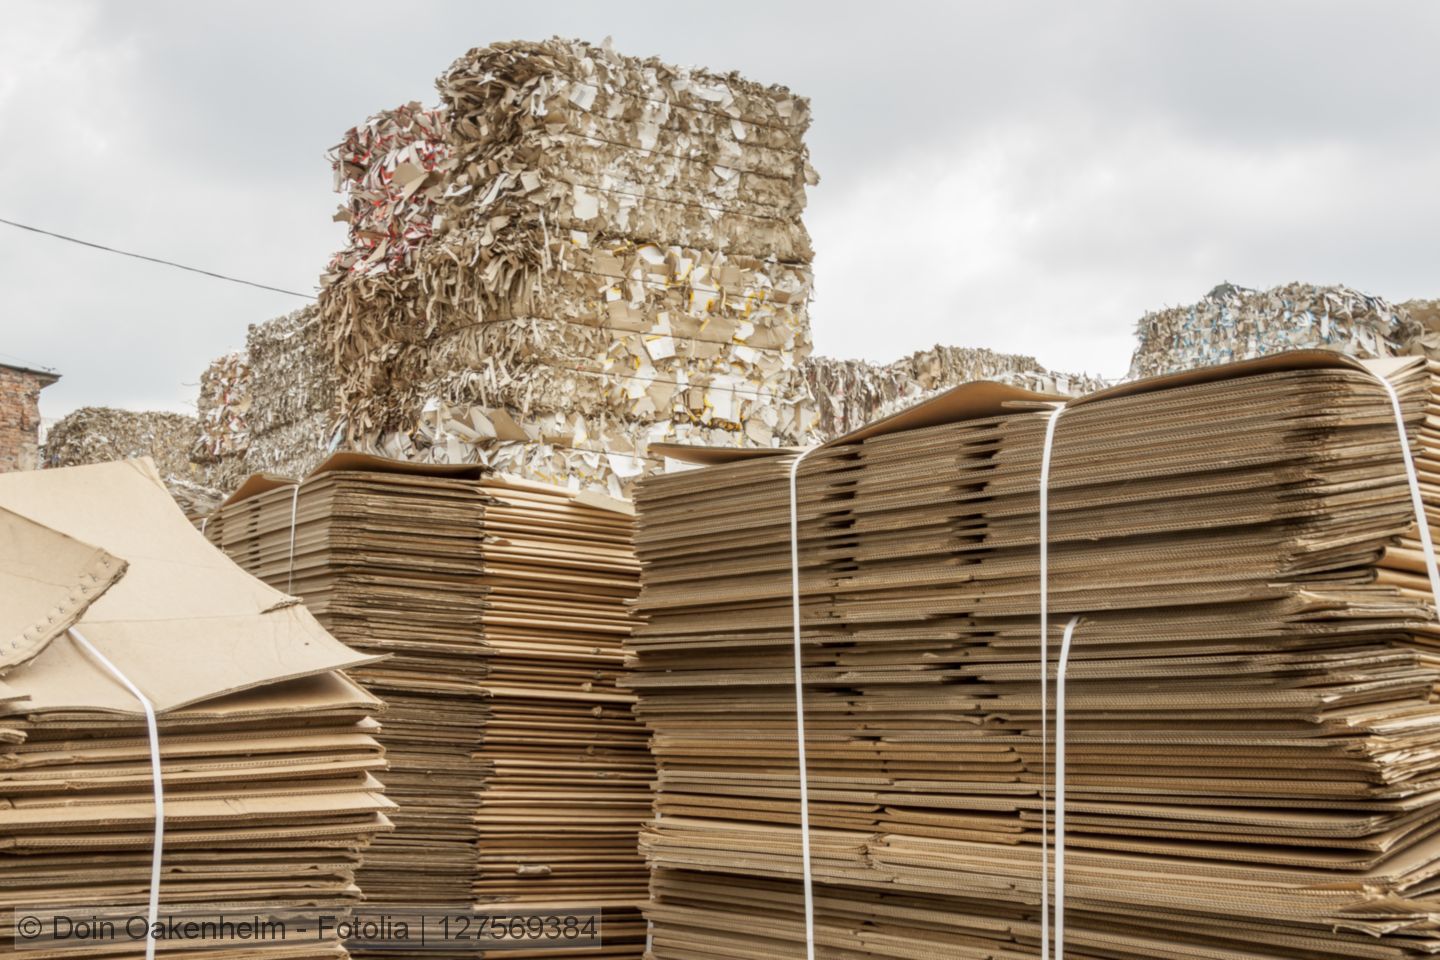 Stacked bales of recovered paper and bundles of flat corrugated board boxes stored in a yard.